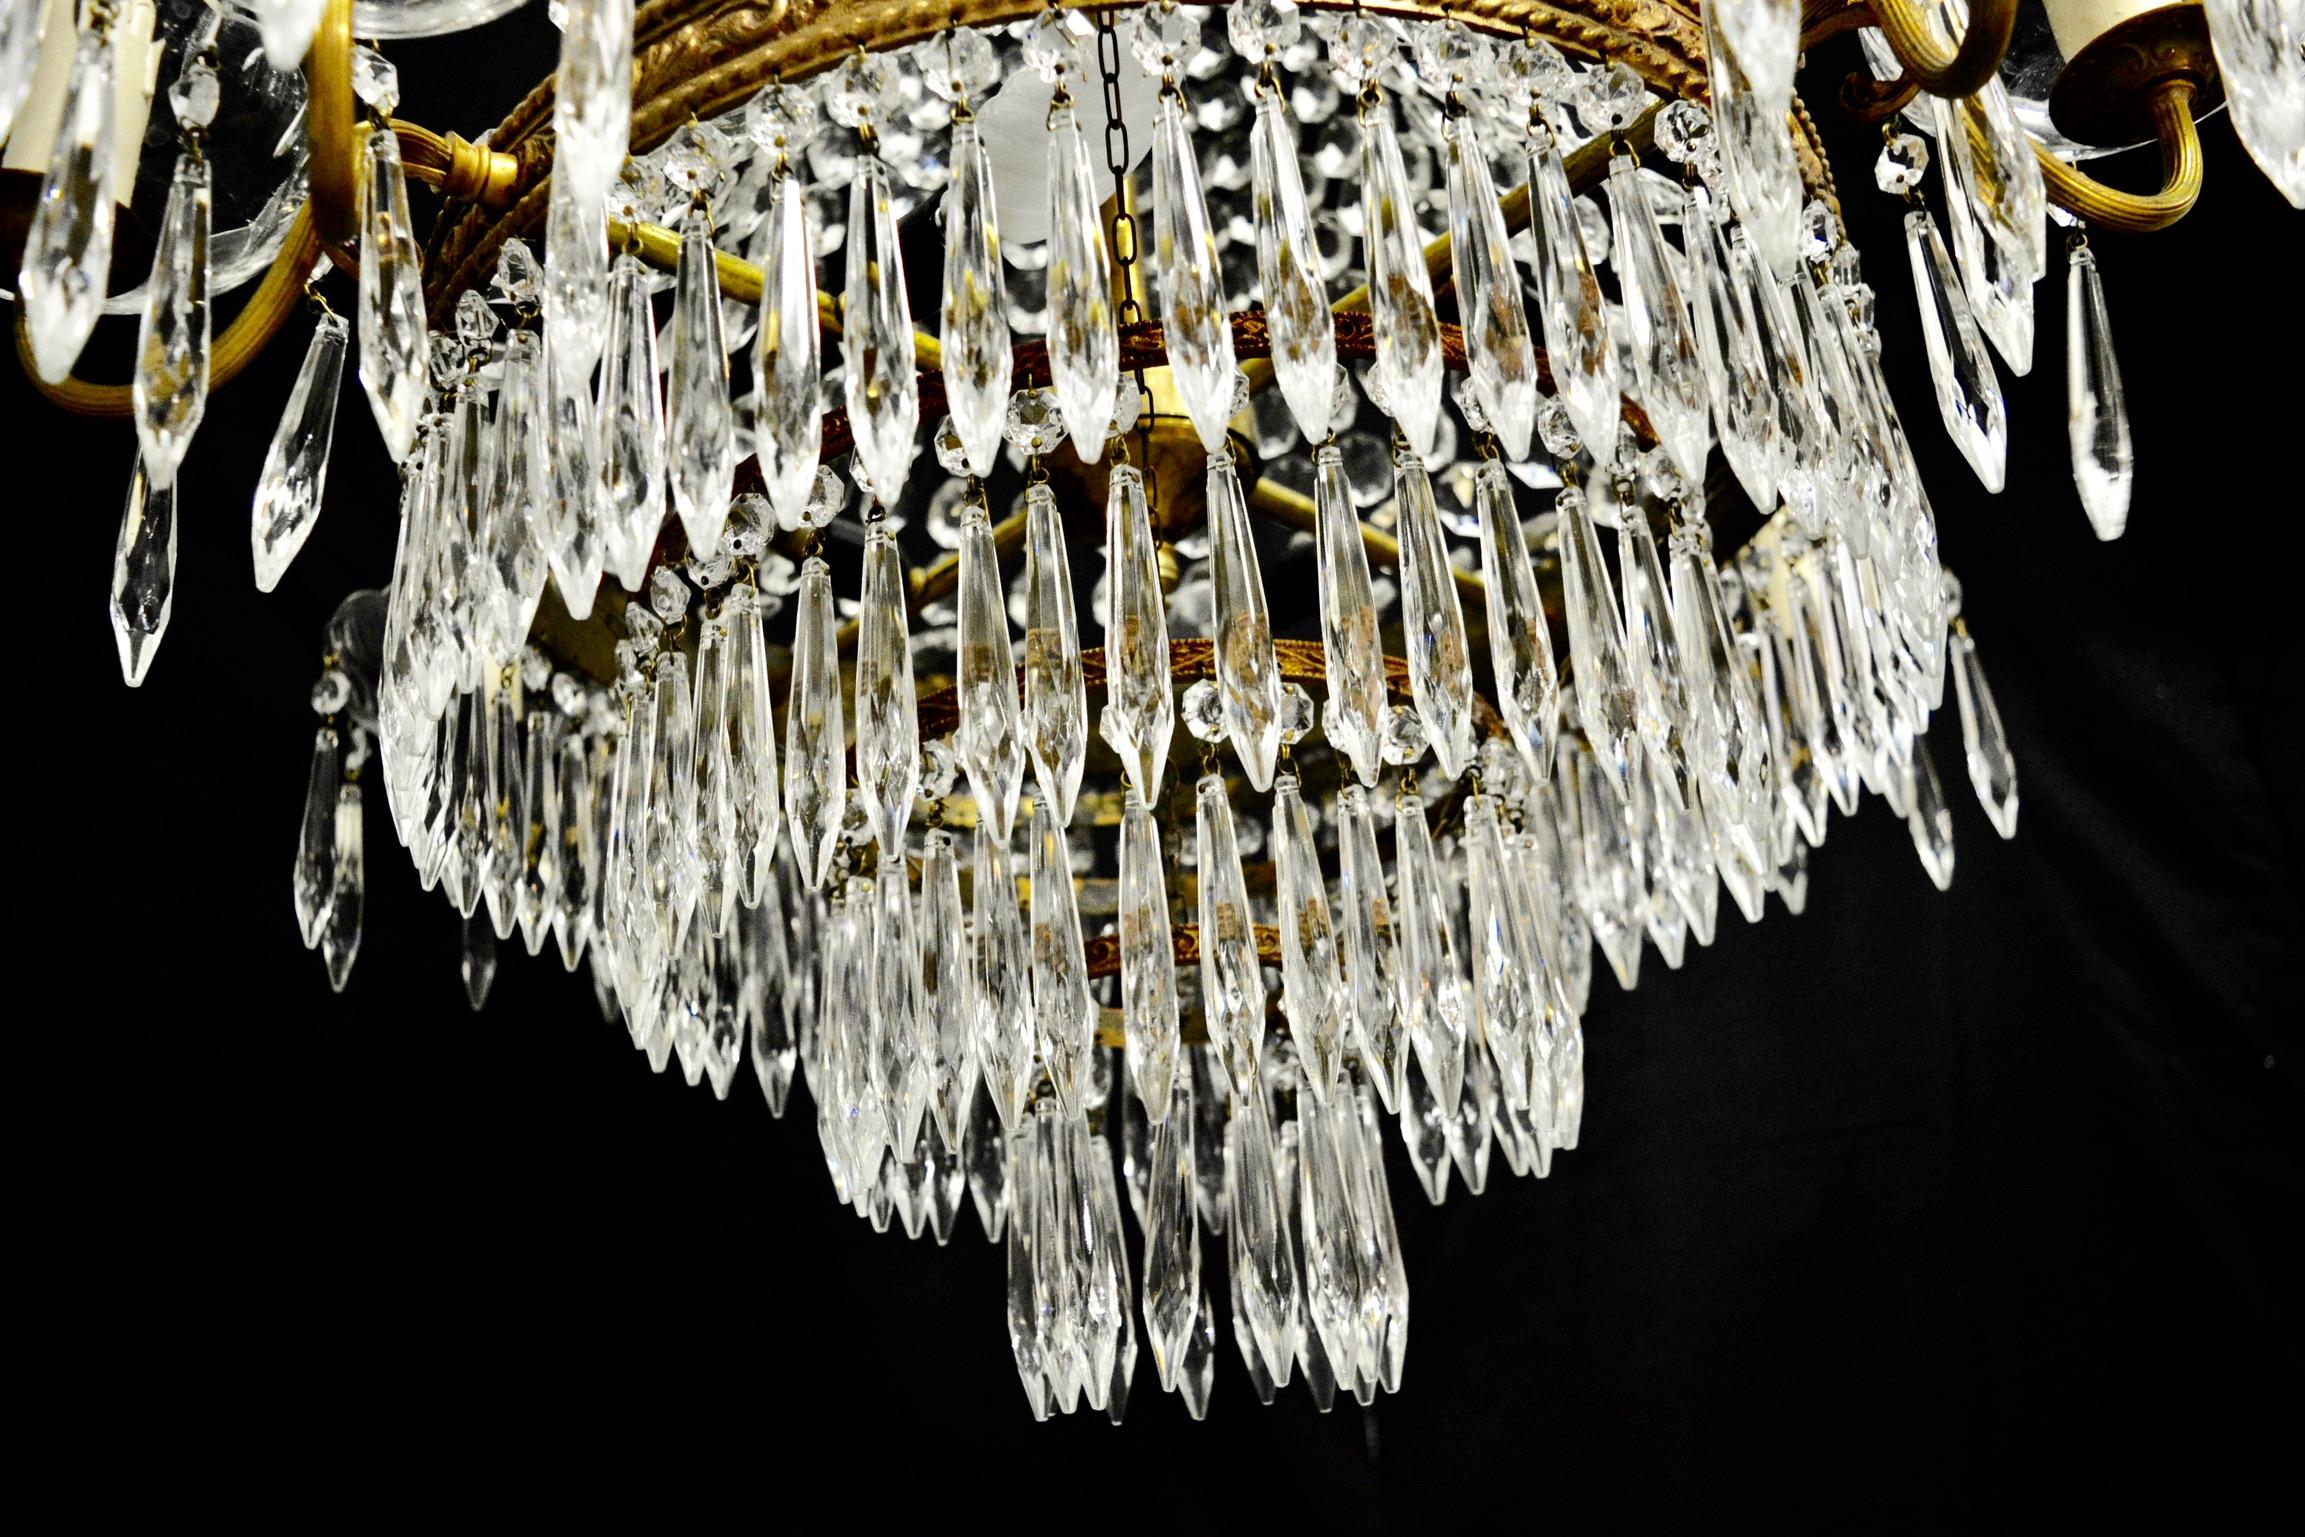 This brass Italian Empire chandelier has 12 lights. Octagonal botton chains hang from the top to the central frame part of the chandelier. A waterfall bottom is covered all around by icicle cut crystal drops. Glass cups holding icicle drops are